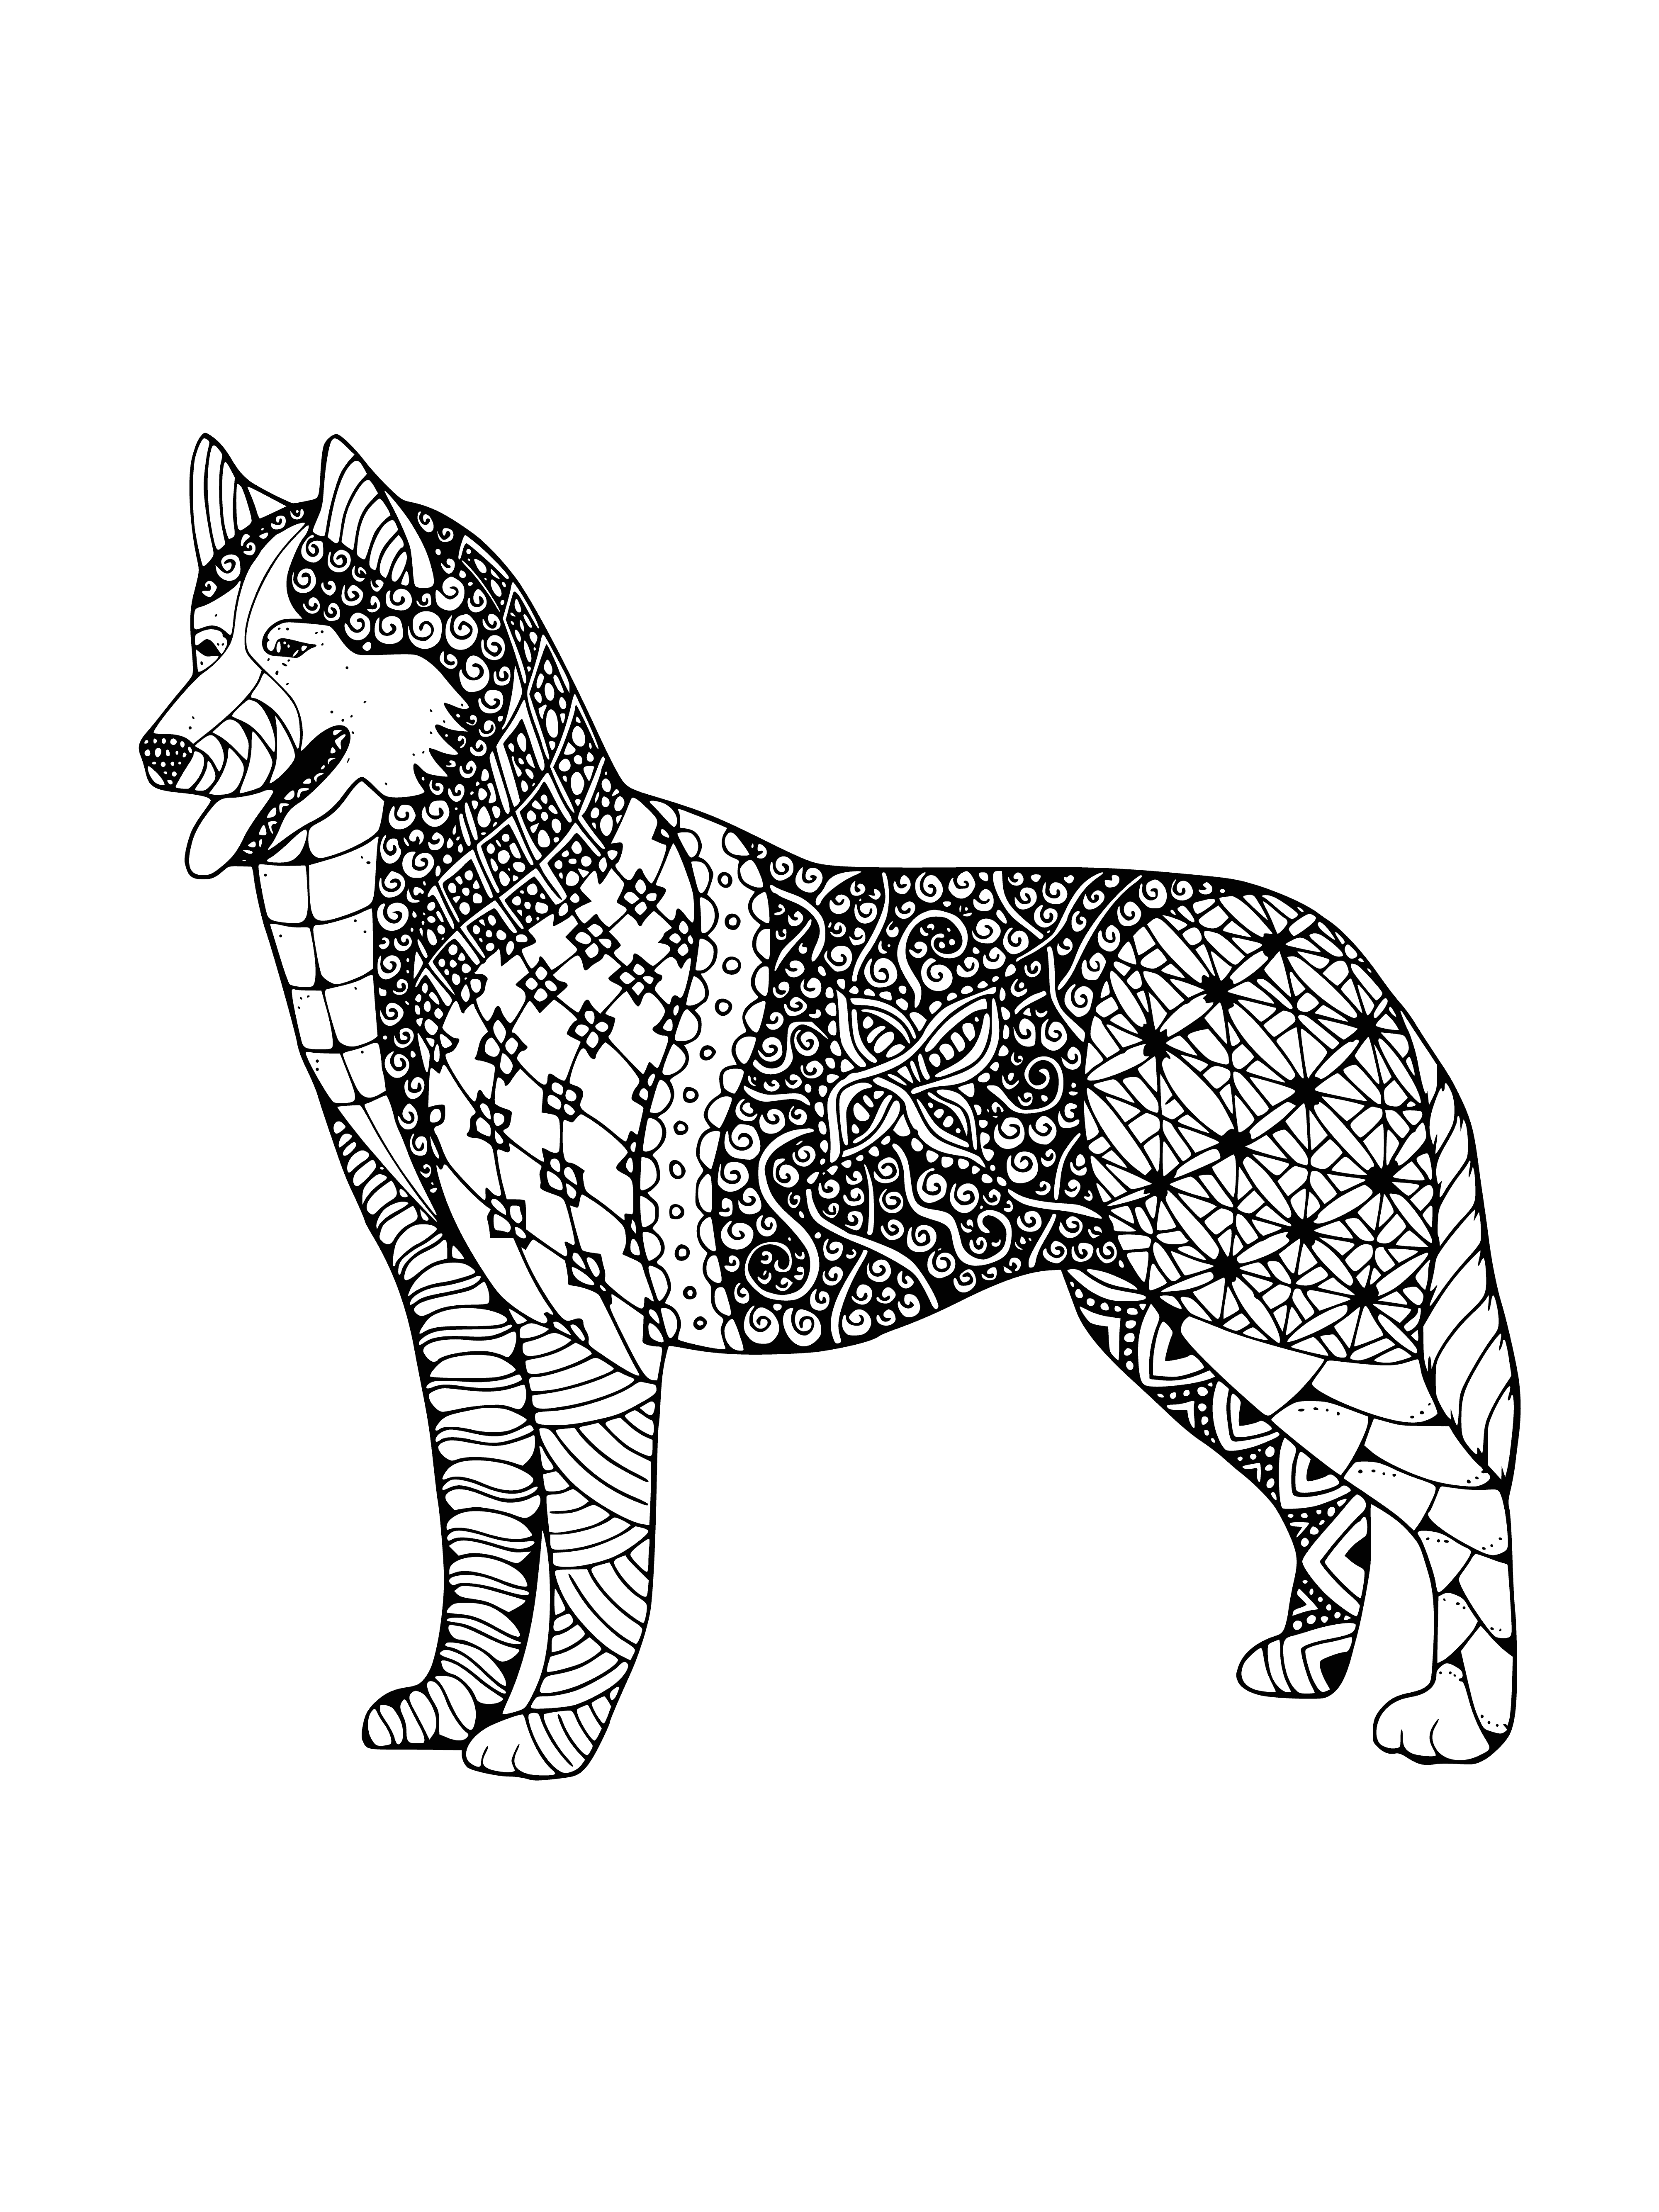 coloring page: Coloring page of a cute husky dog, sitting down with its head turned, fur thick and fluffy. #adultcoloring #animalcoloring